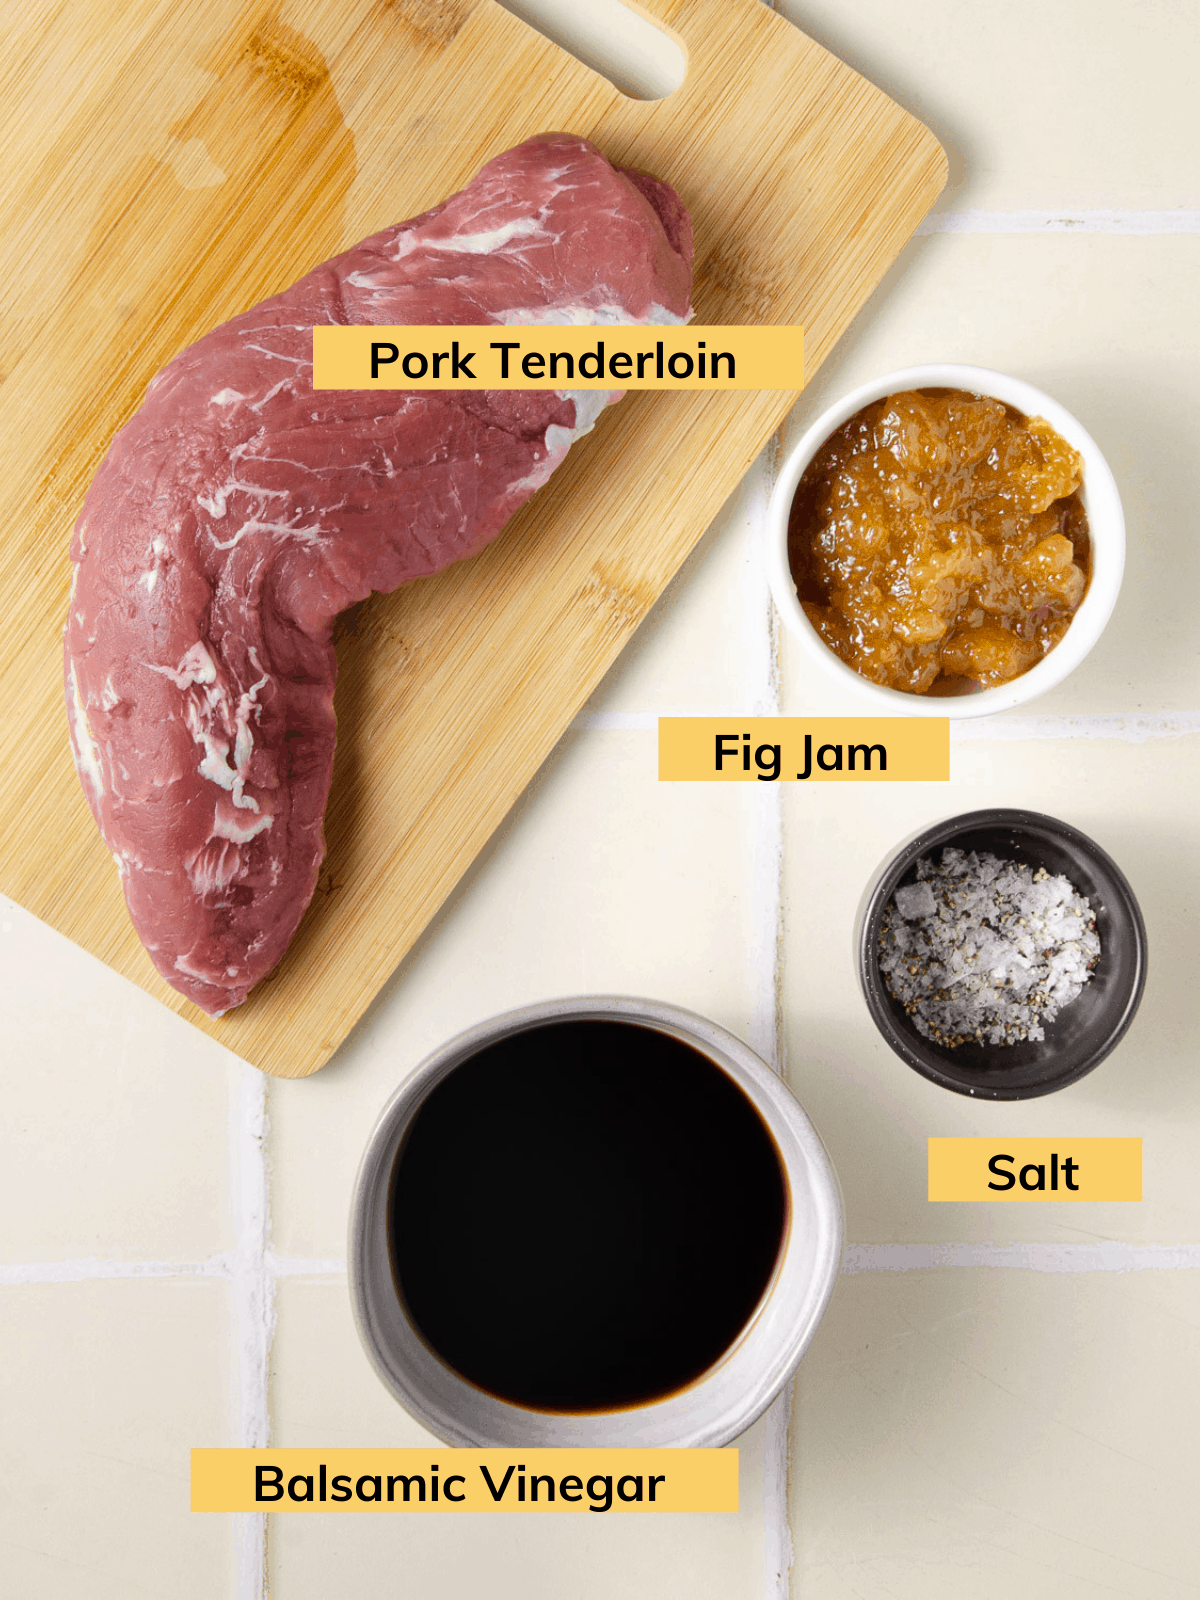 Ingredients for a perfectly cooked pork tenderloin.